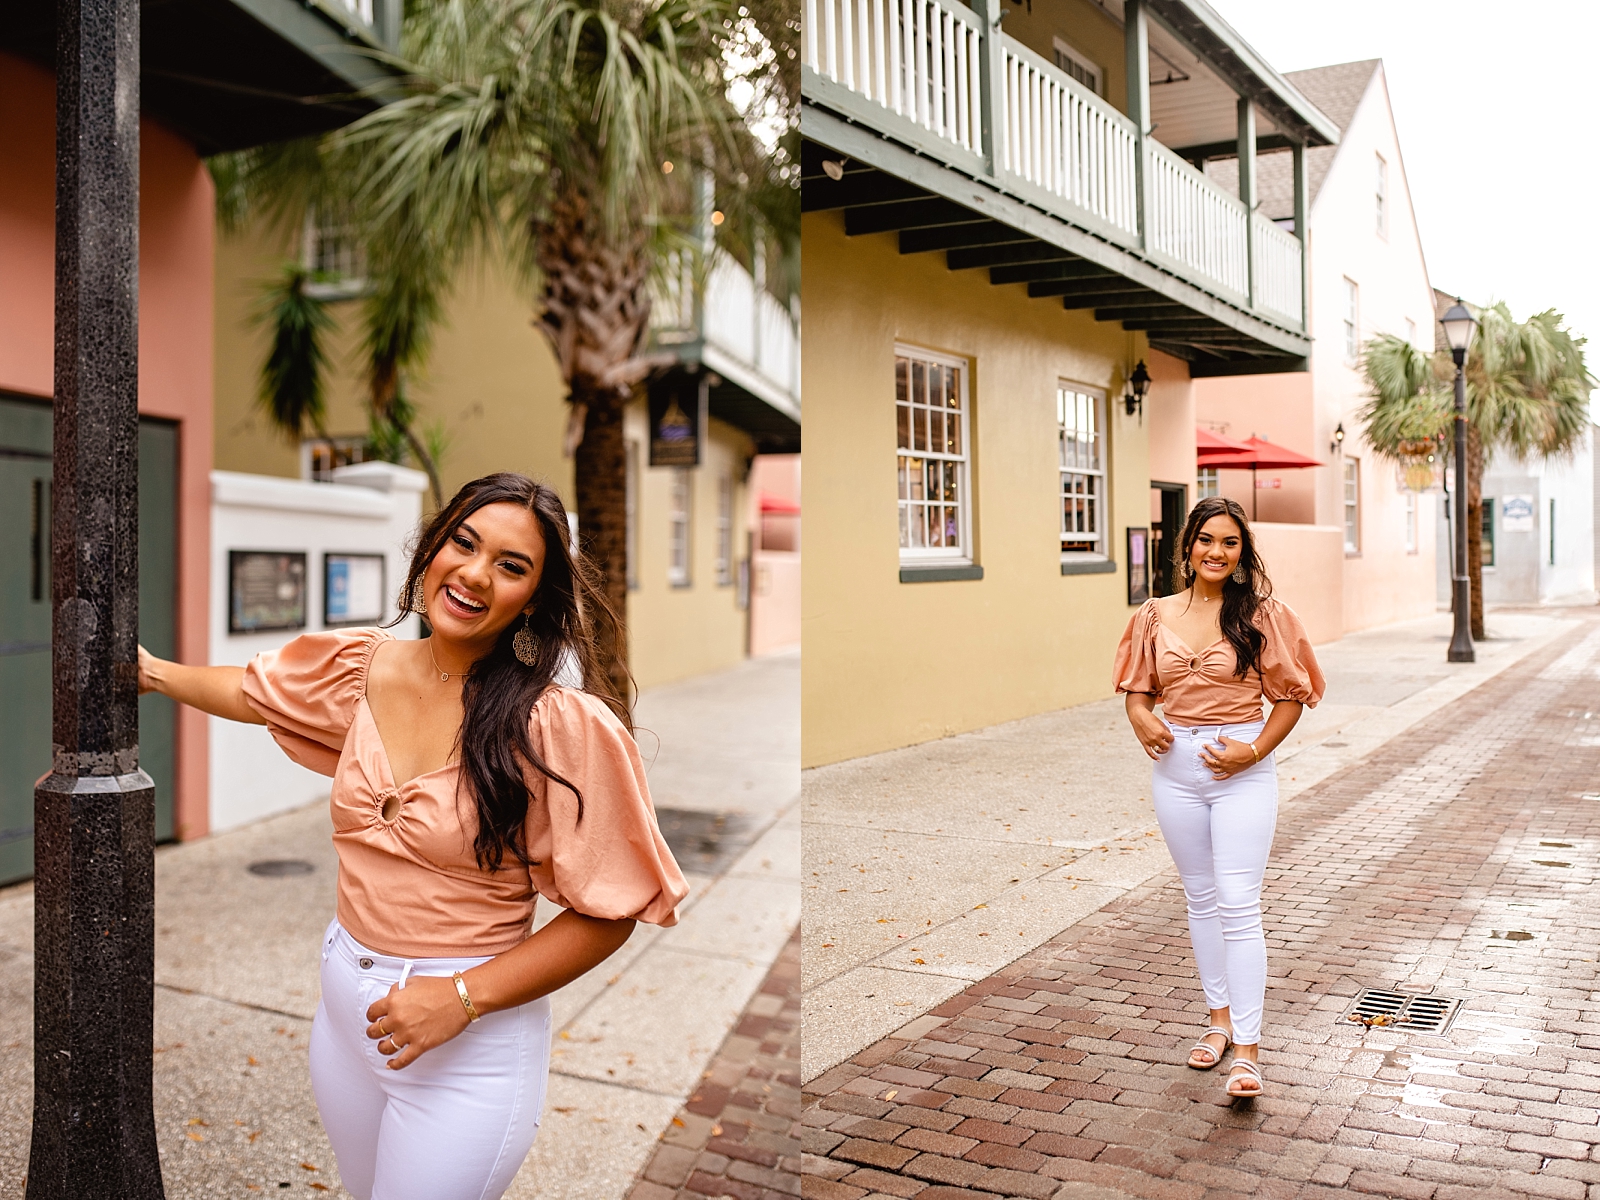 High school senior pictures taken in downtown St Augustine, FL on the cobble stone road. Florida senior photographer. Painted Oak Photography. Posing ideas for senior girls.